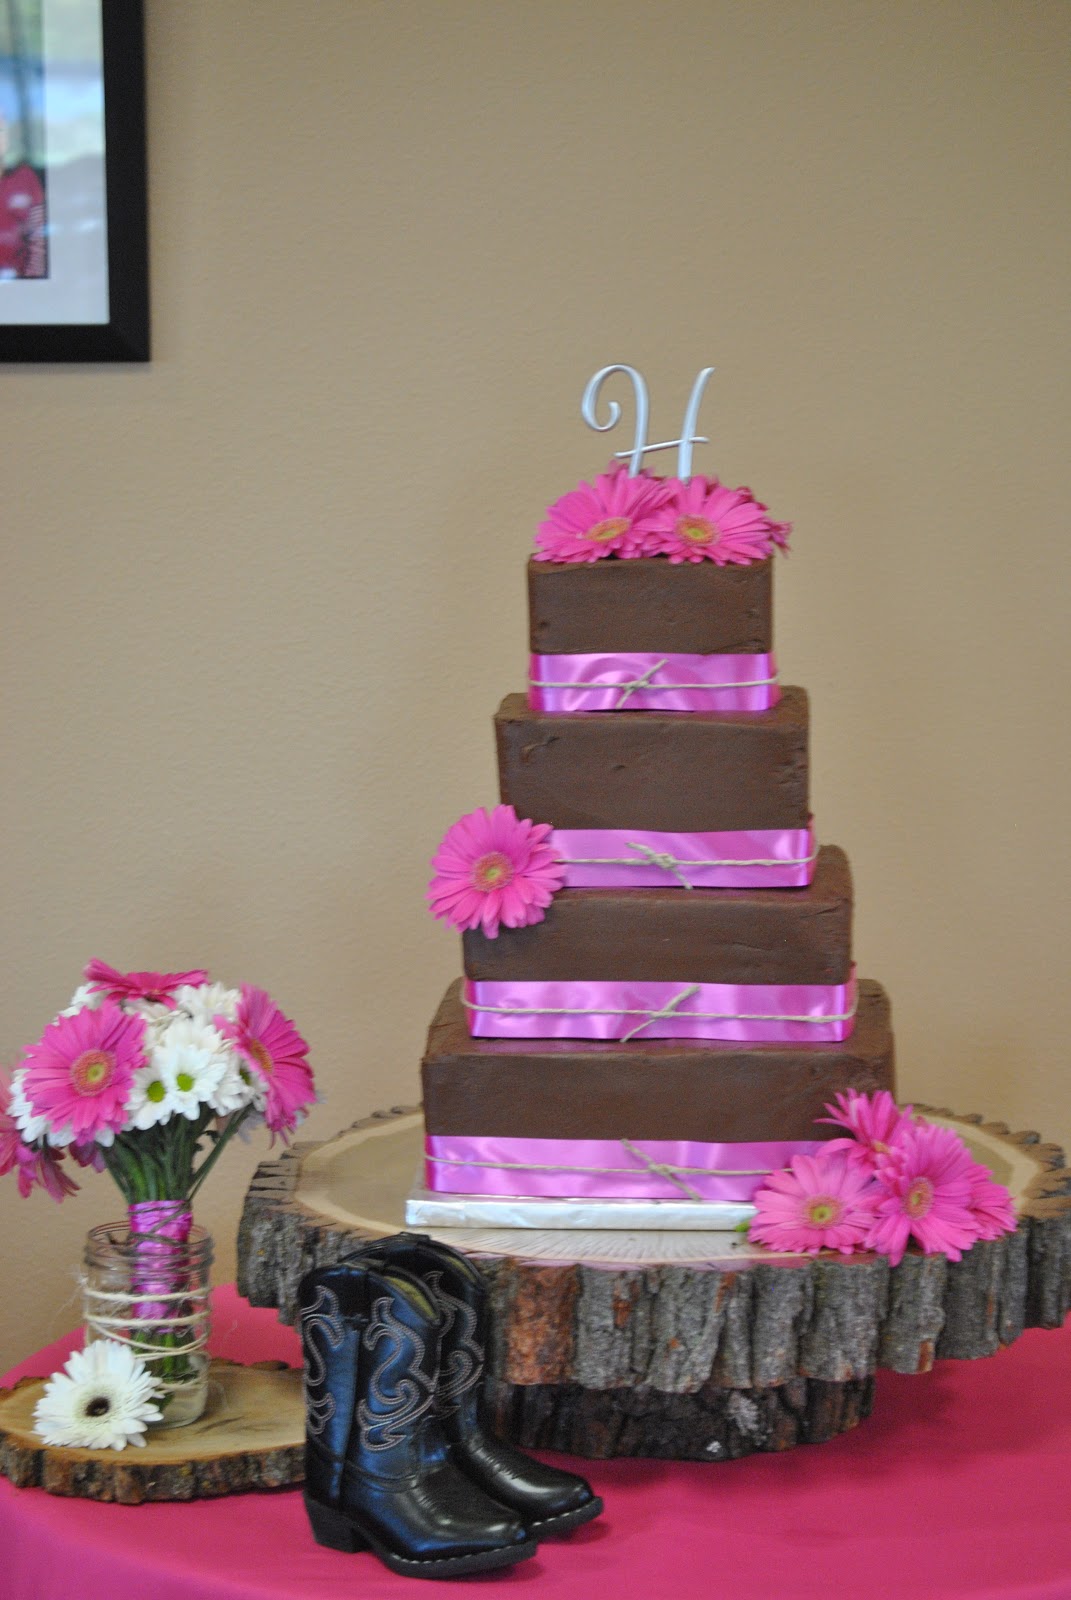 square wedding cake stands Holm And Sower wedding sign I made out of an old chalkboard that I 